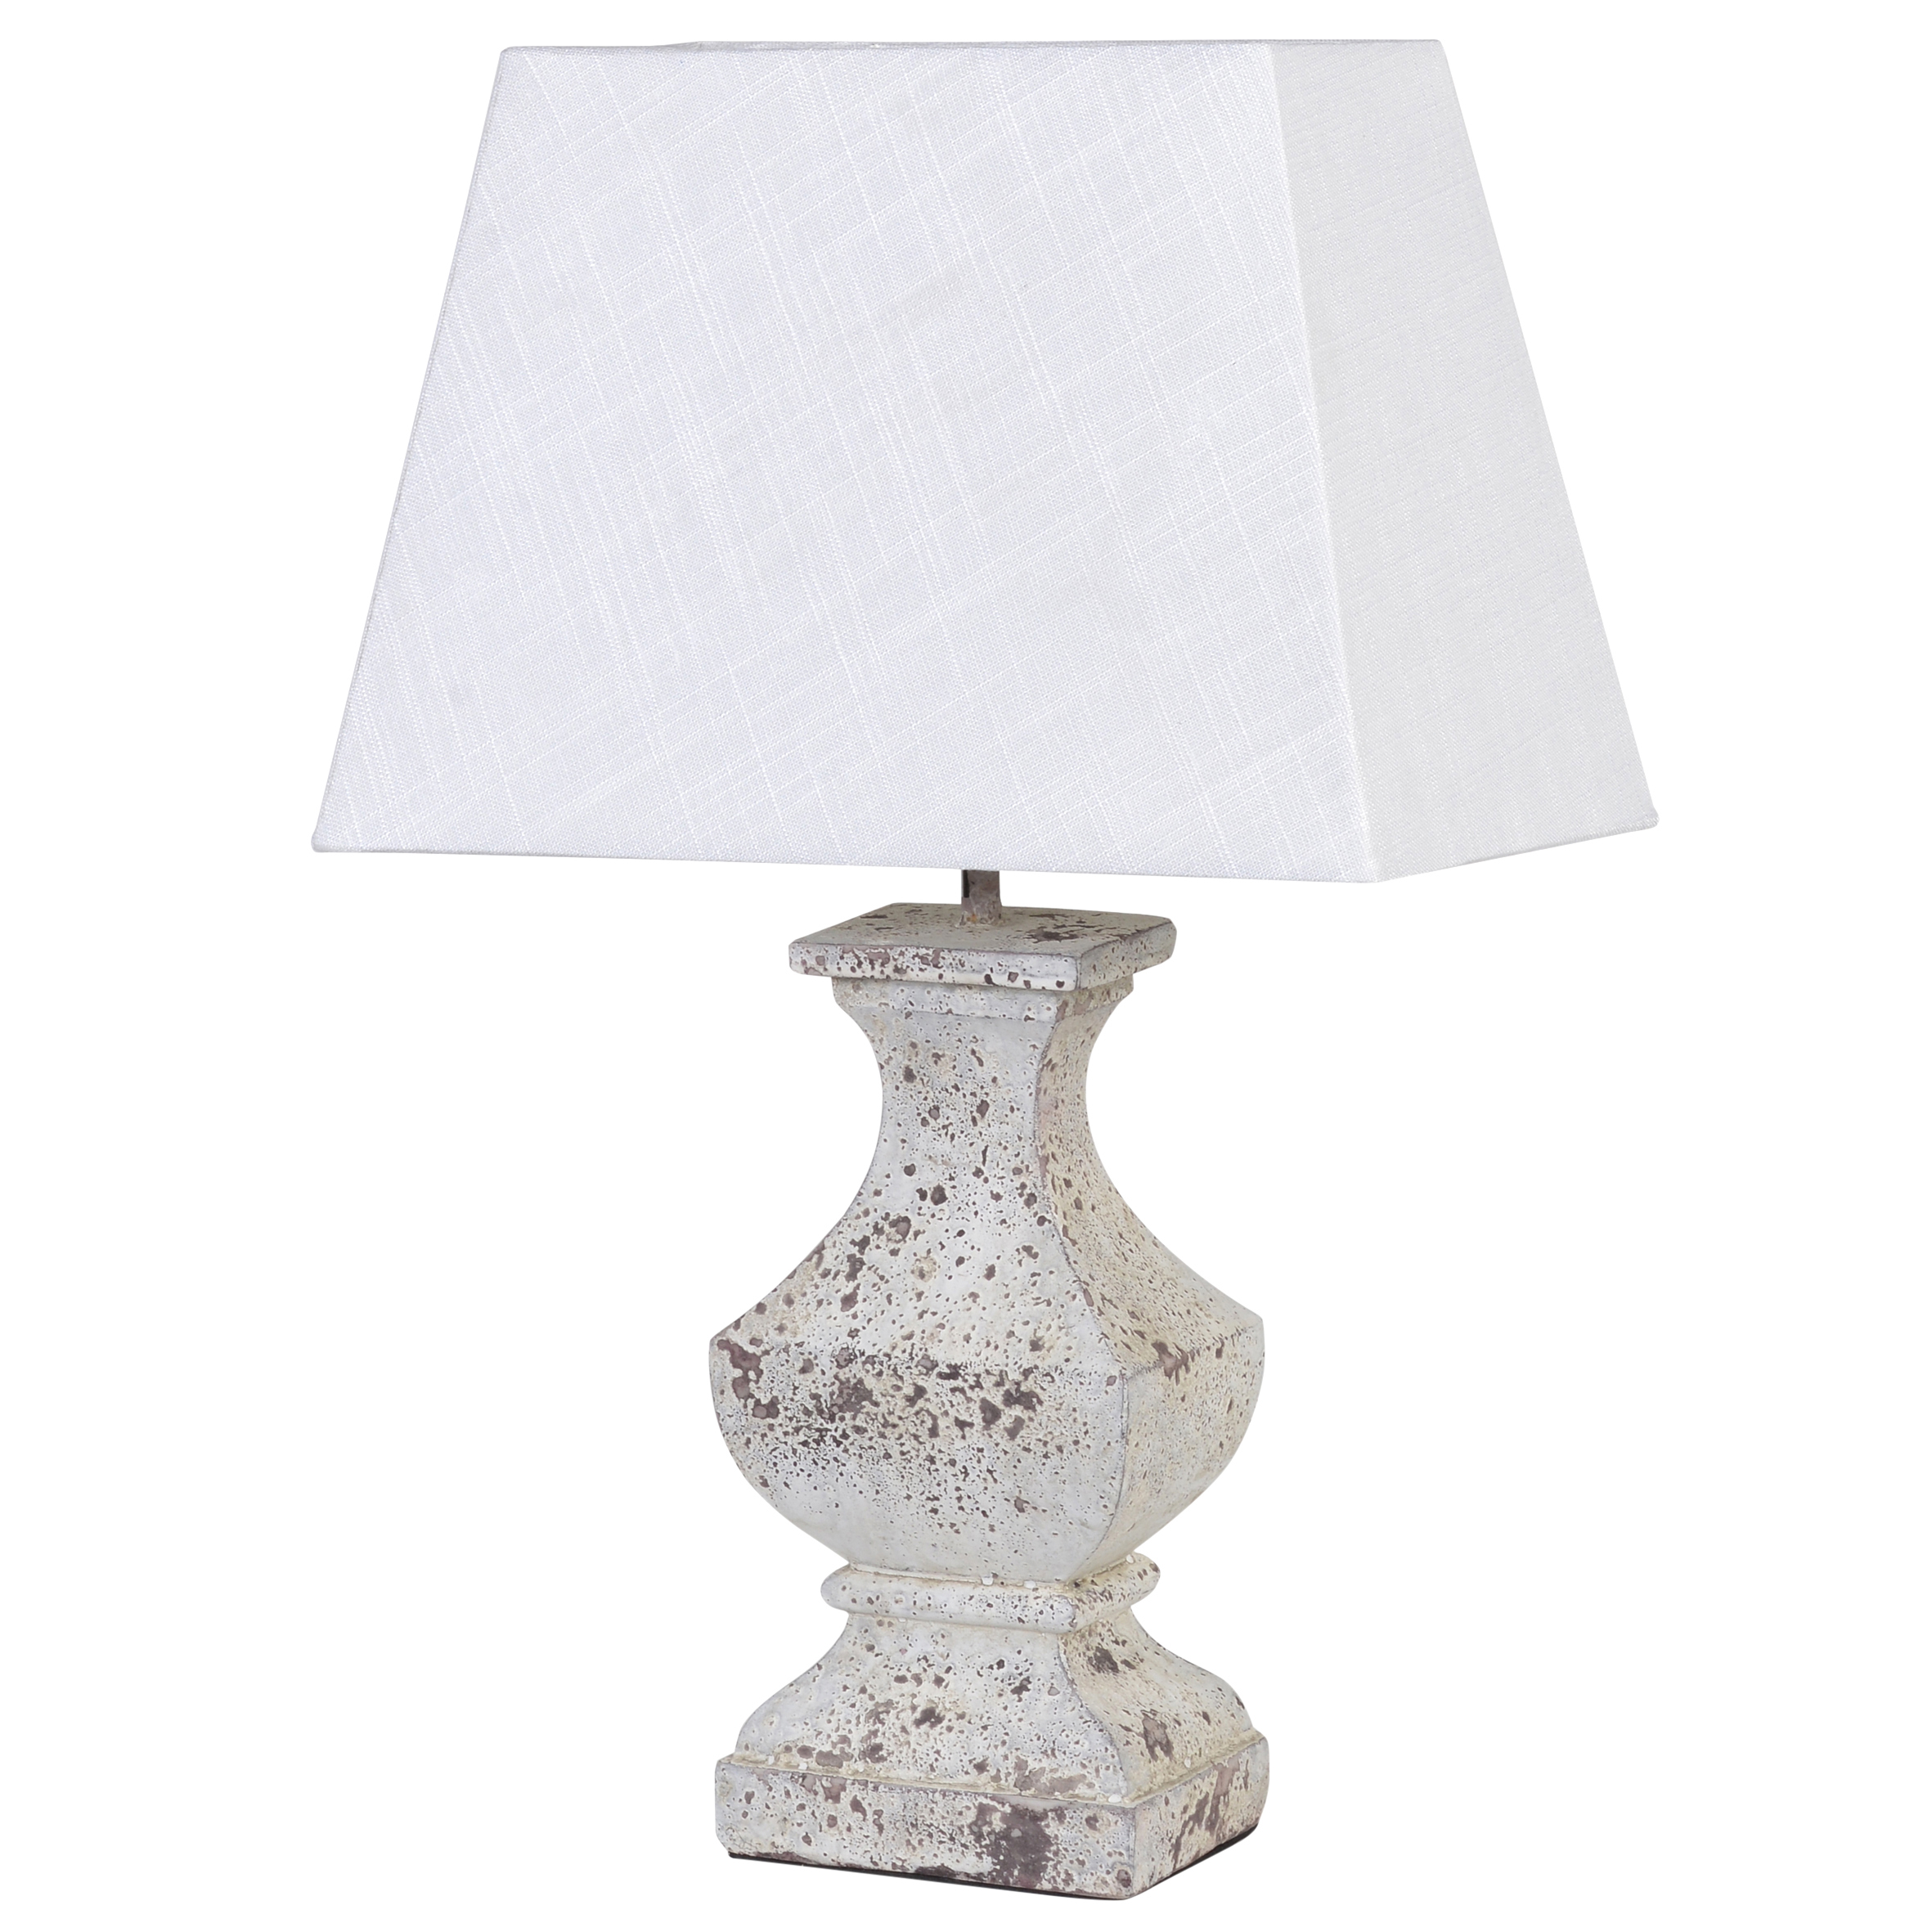 Table lamp, £58, The French Bedroom Co.